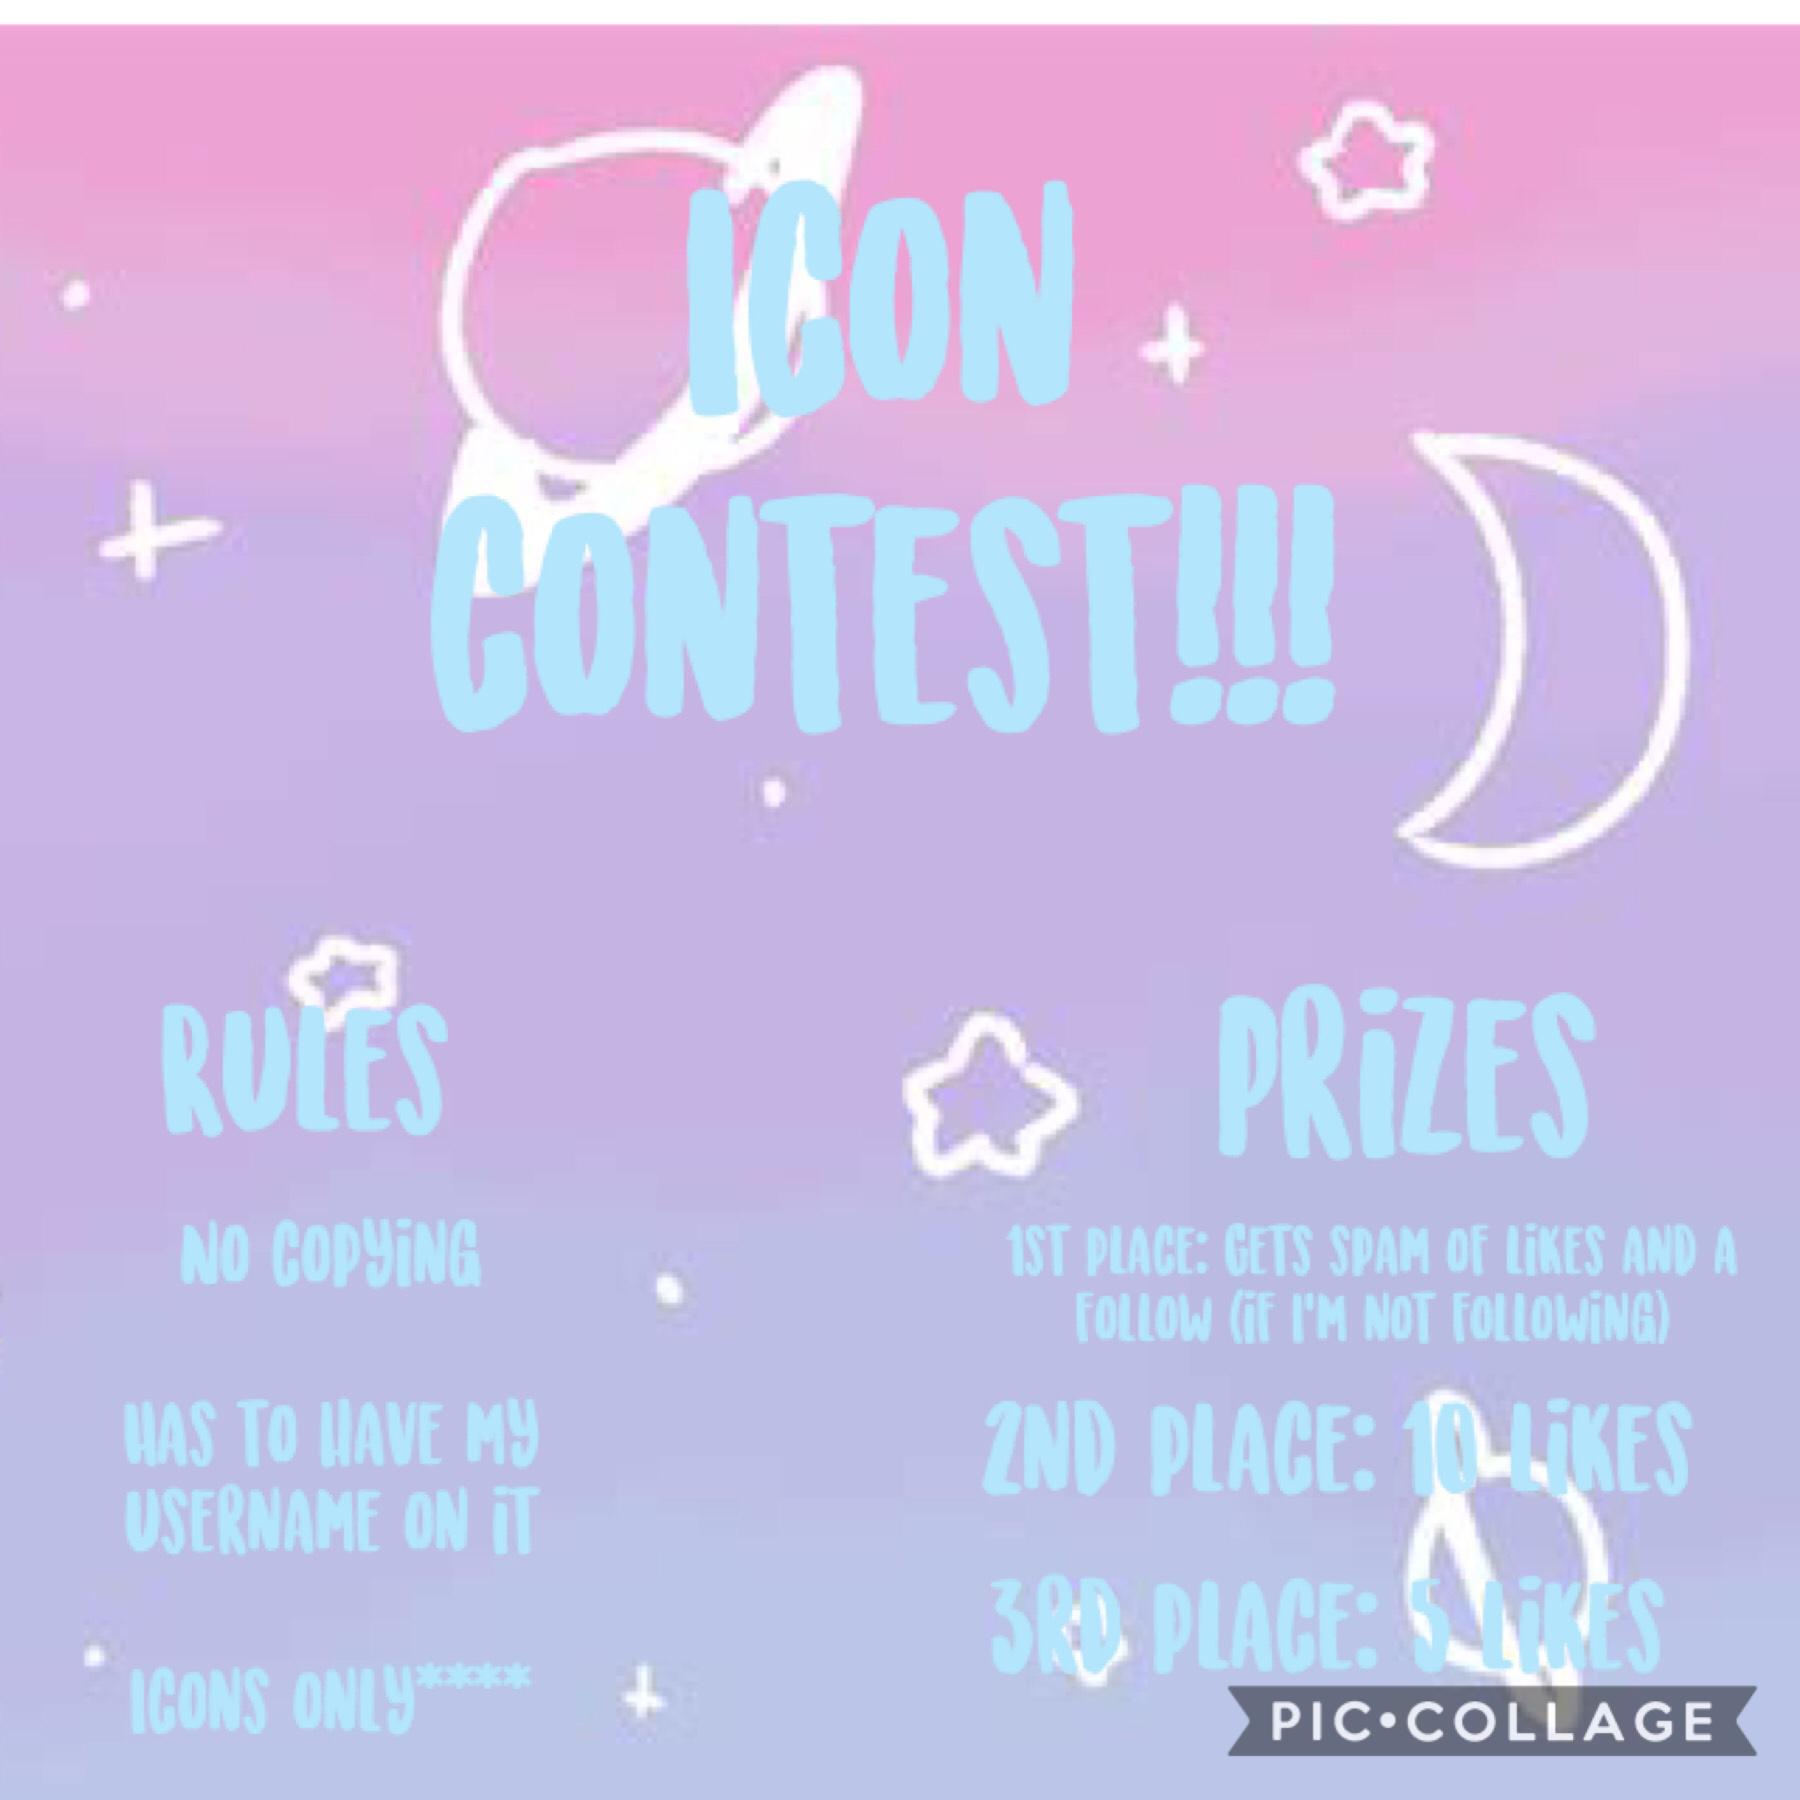 Icon contest!!! Read this for rules and prizes^^ TYSM FOR 250 FOLLOWERS!!!!❤️ ik nobody is gunna do this but I’m doing it for fun :)